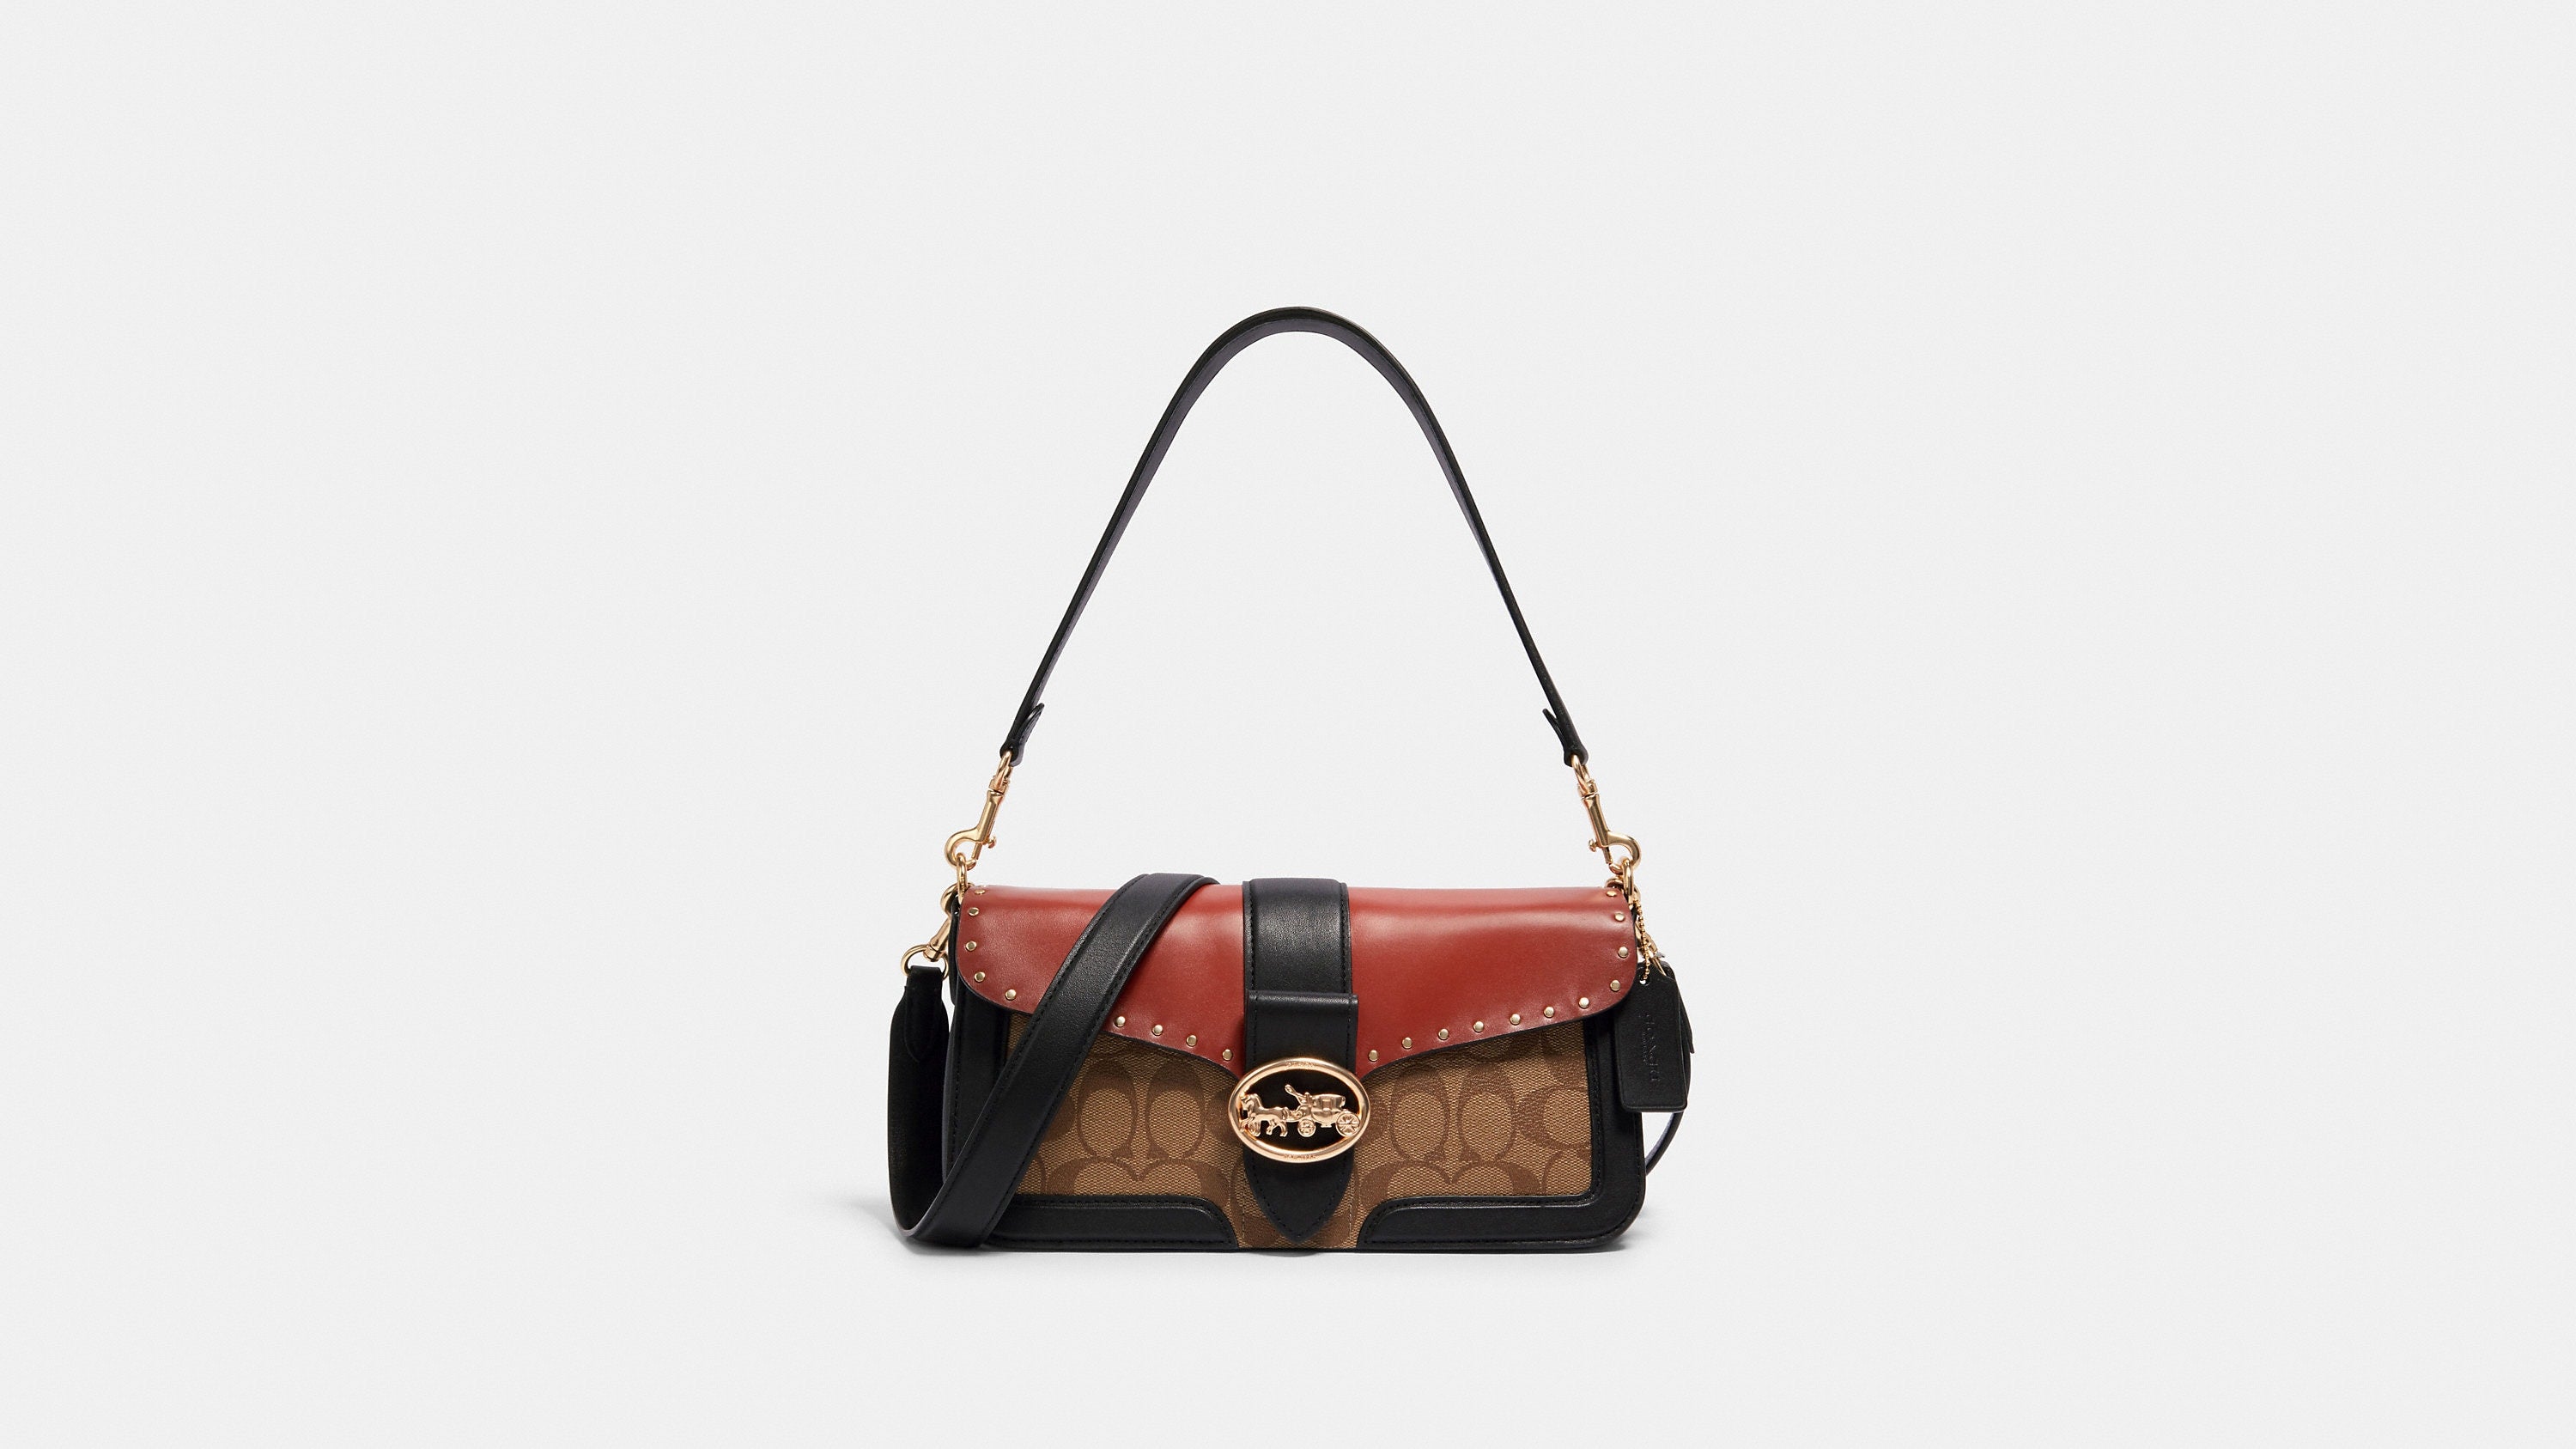 COACH OUTLET ONLINE SALE, SAVE UP TO 70% off EVERYTHING